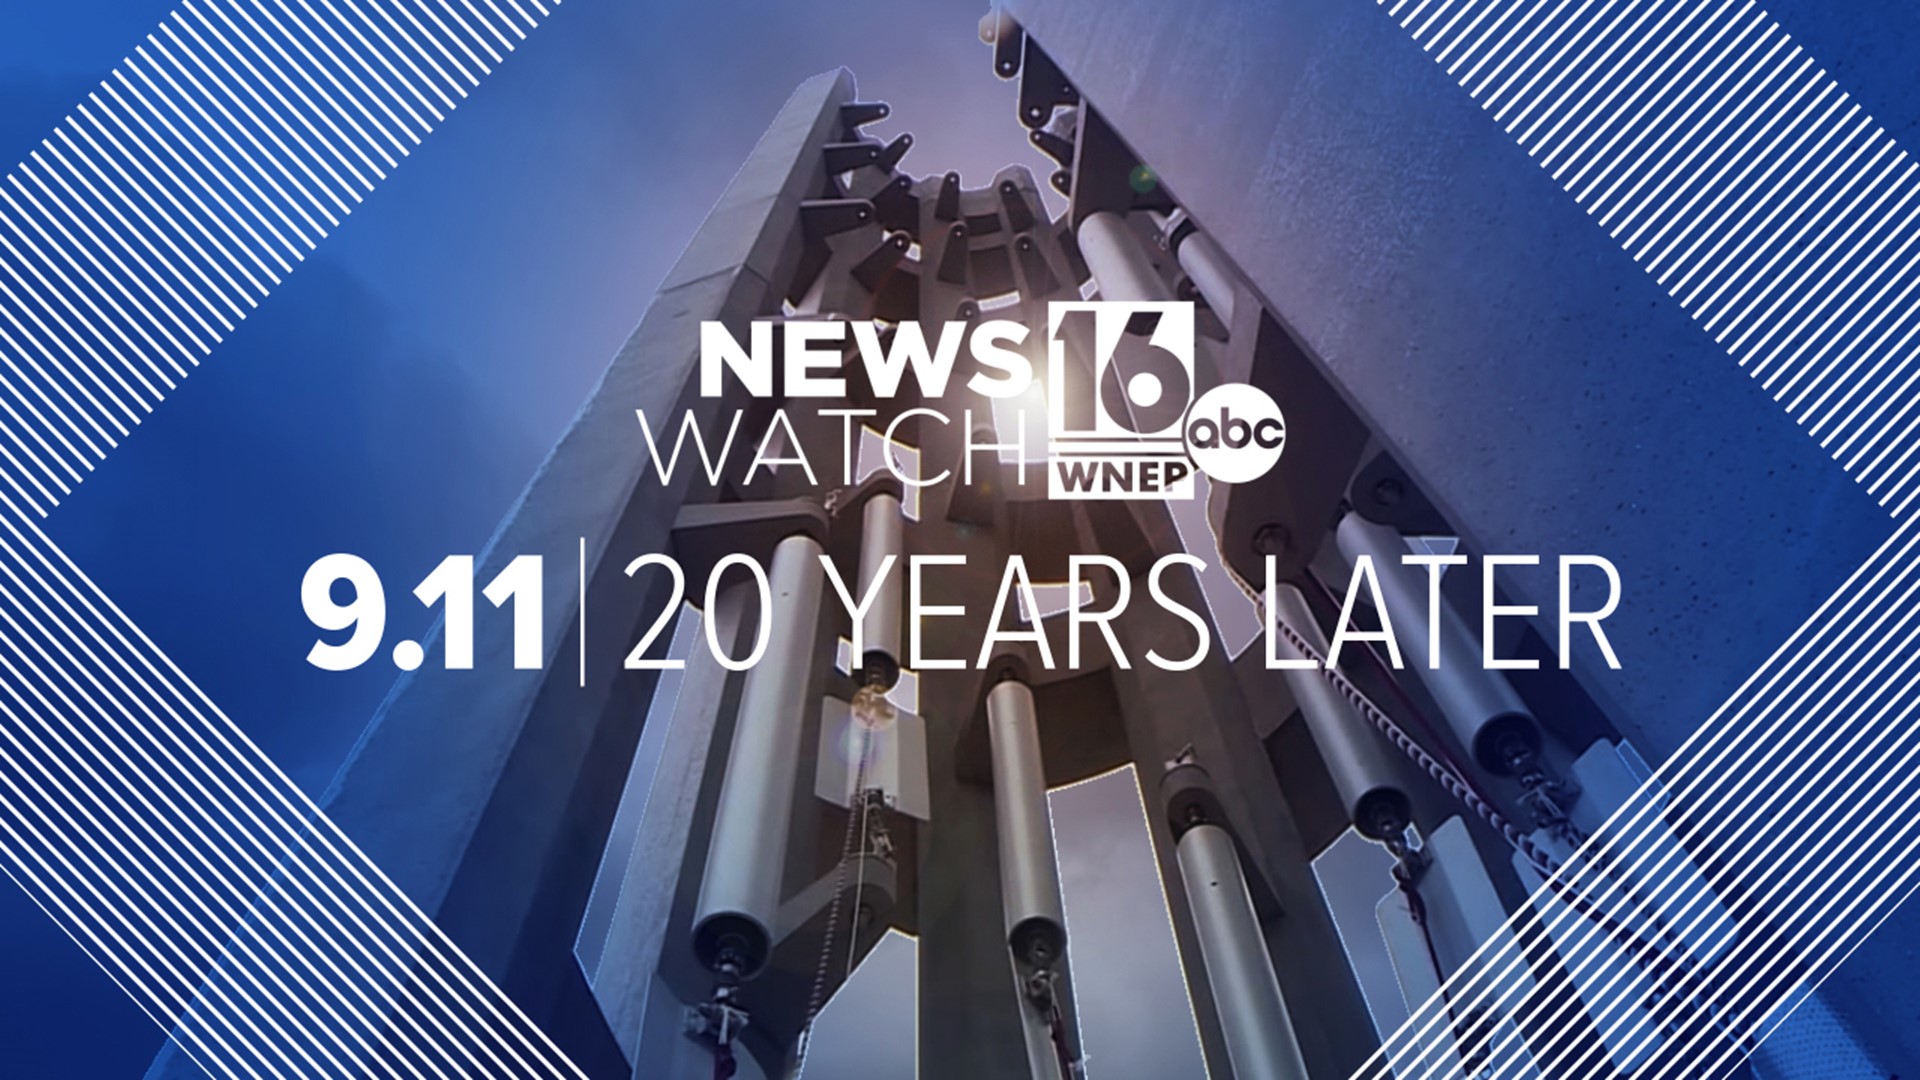 20 years later - we remember those from Northeastern and Central Pennsylvania who lost their lives on 9/11.